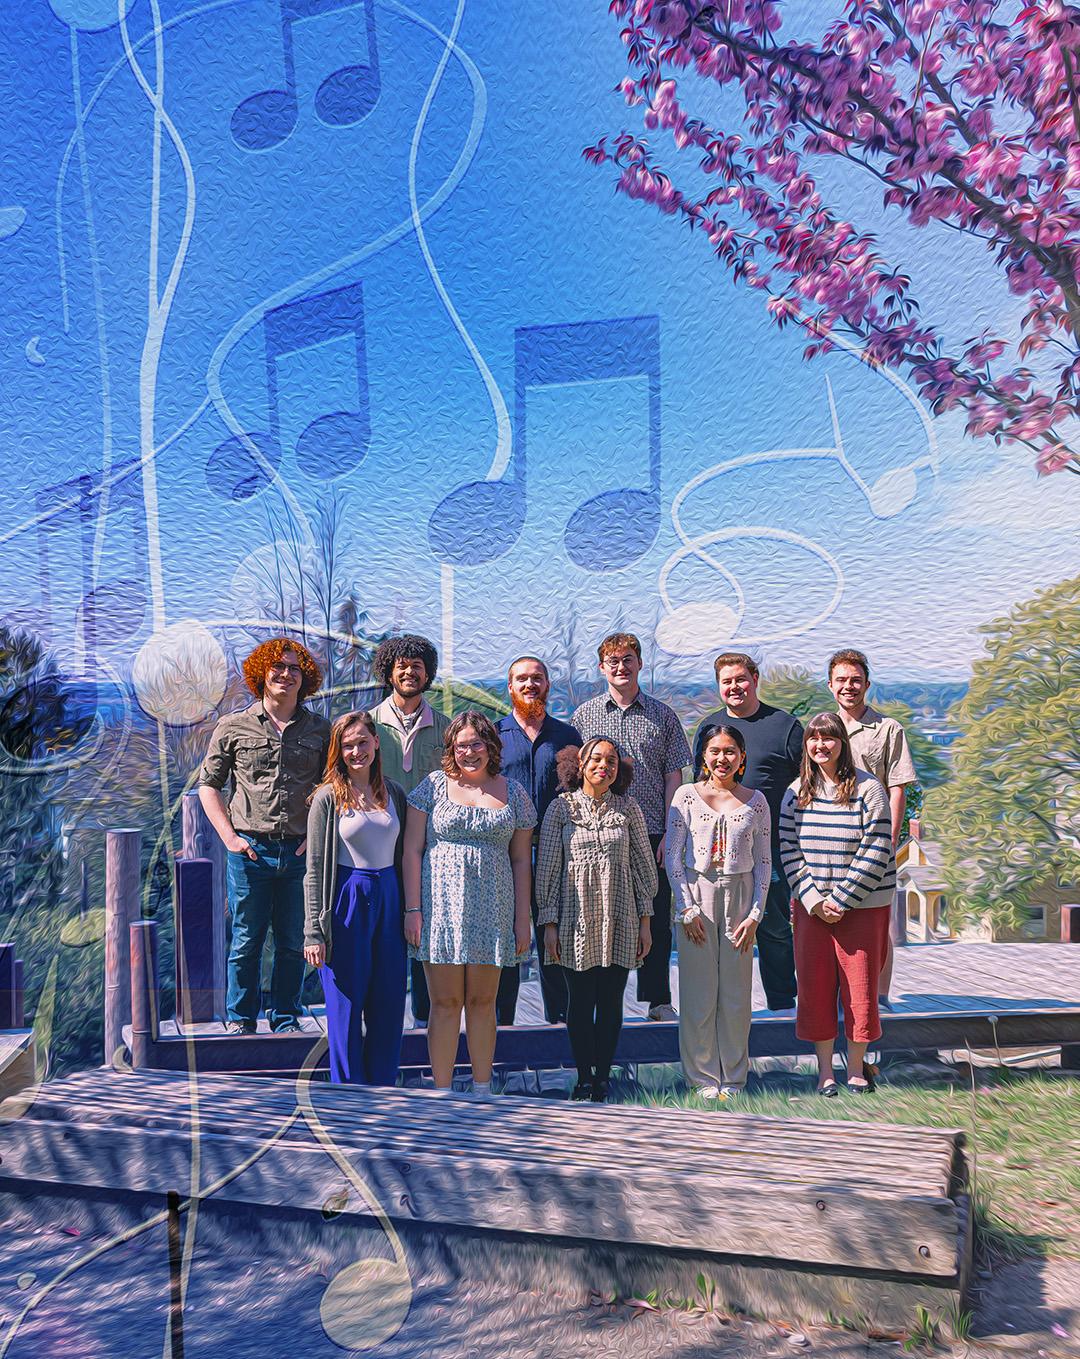 A group of students stand smiling under a flowering cherry tree on a sunny day, music notes float in the air around them